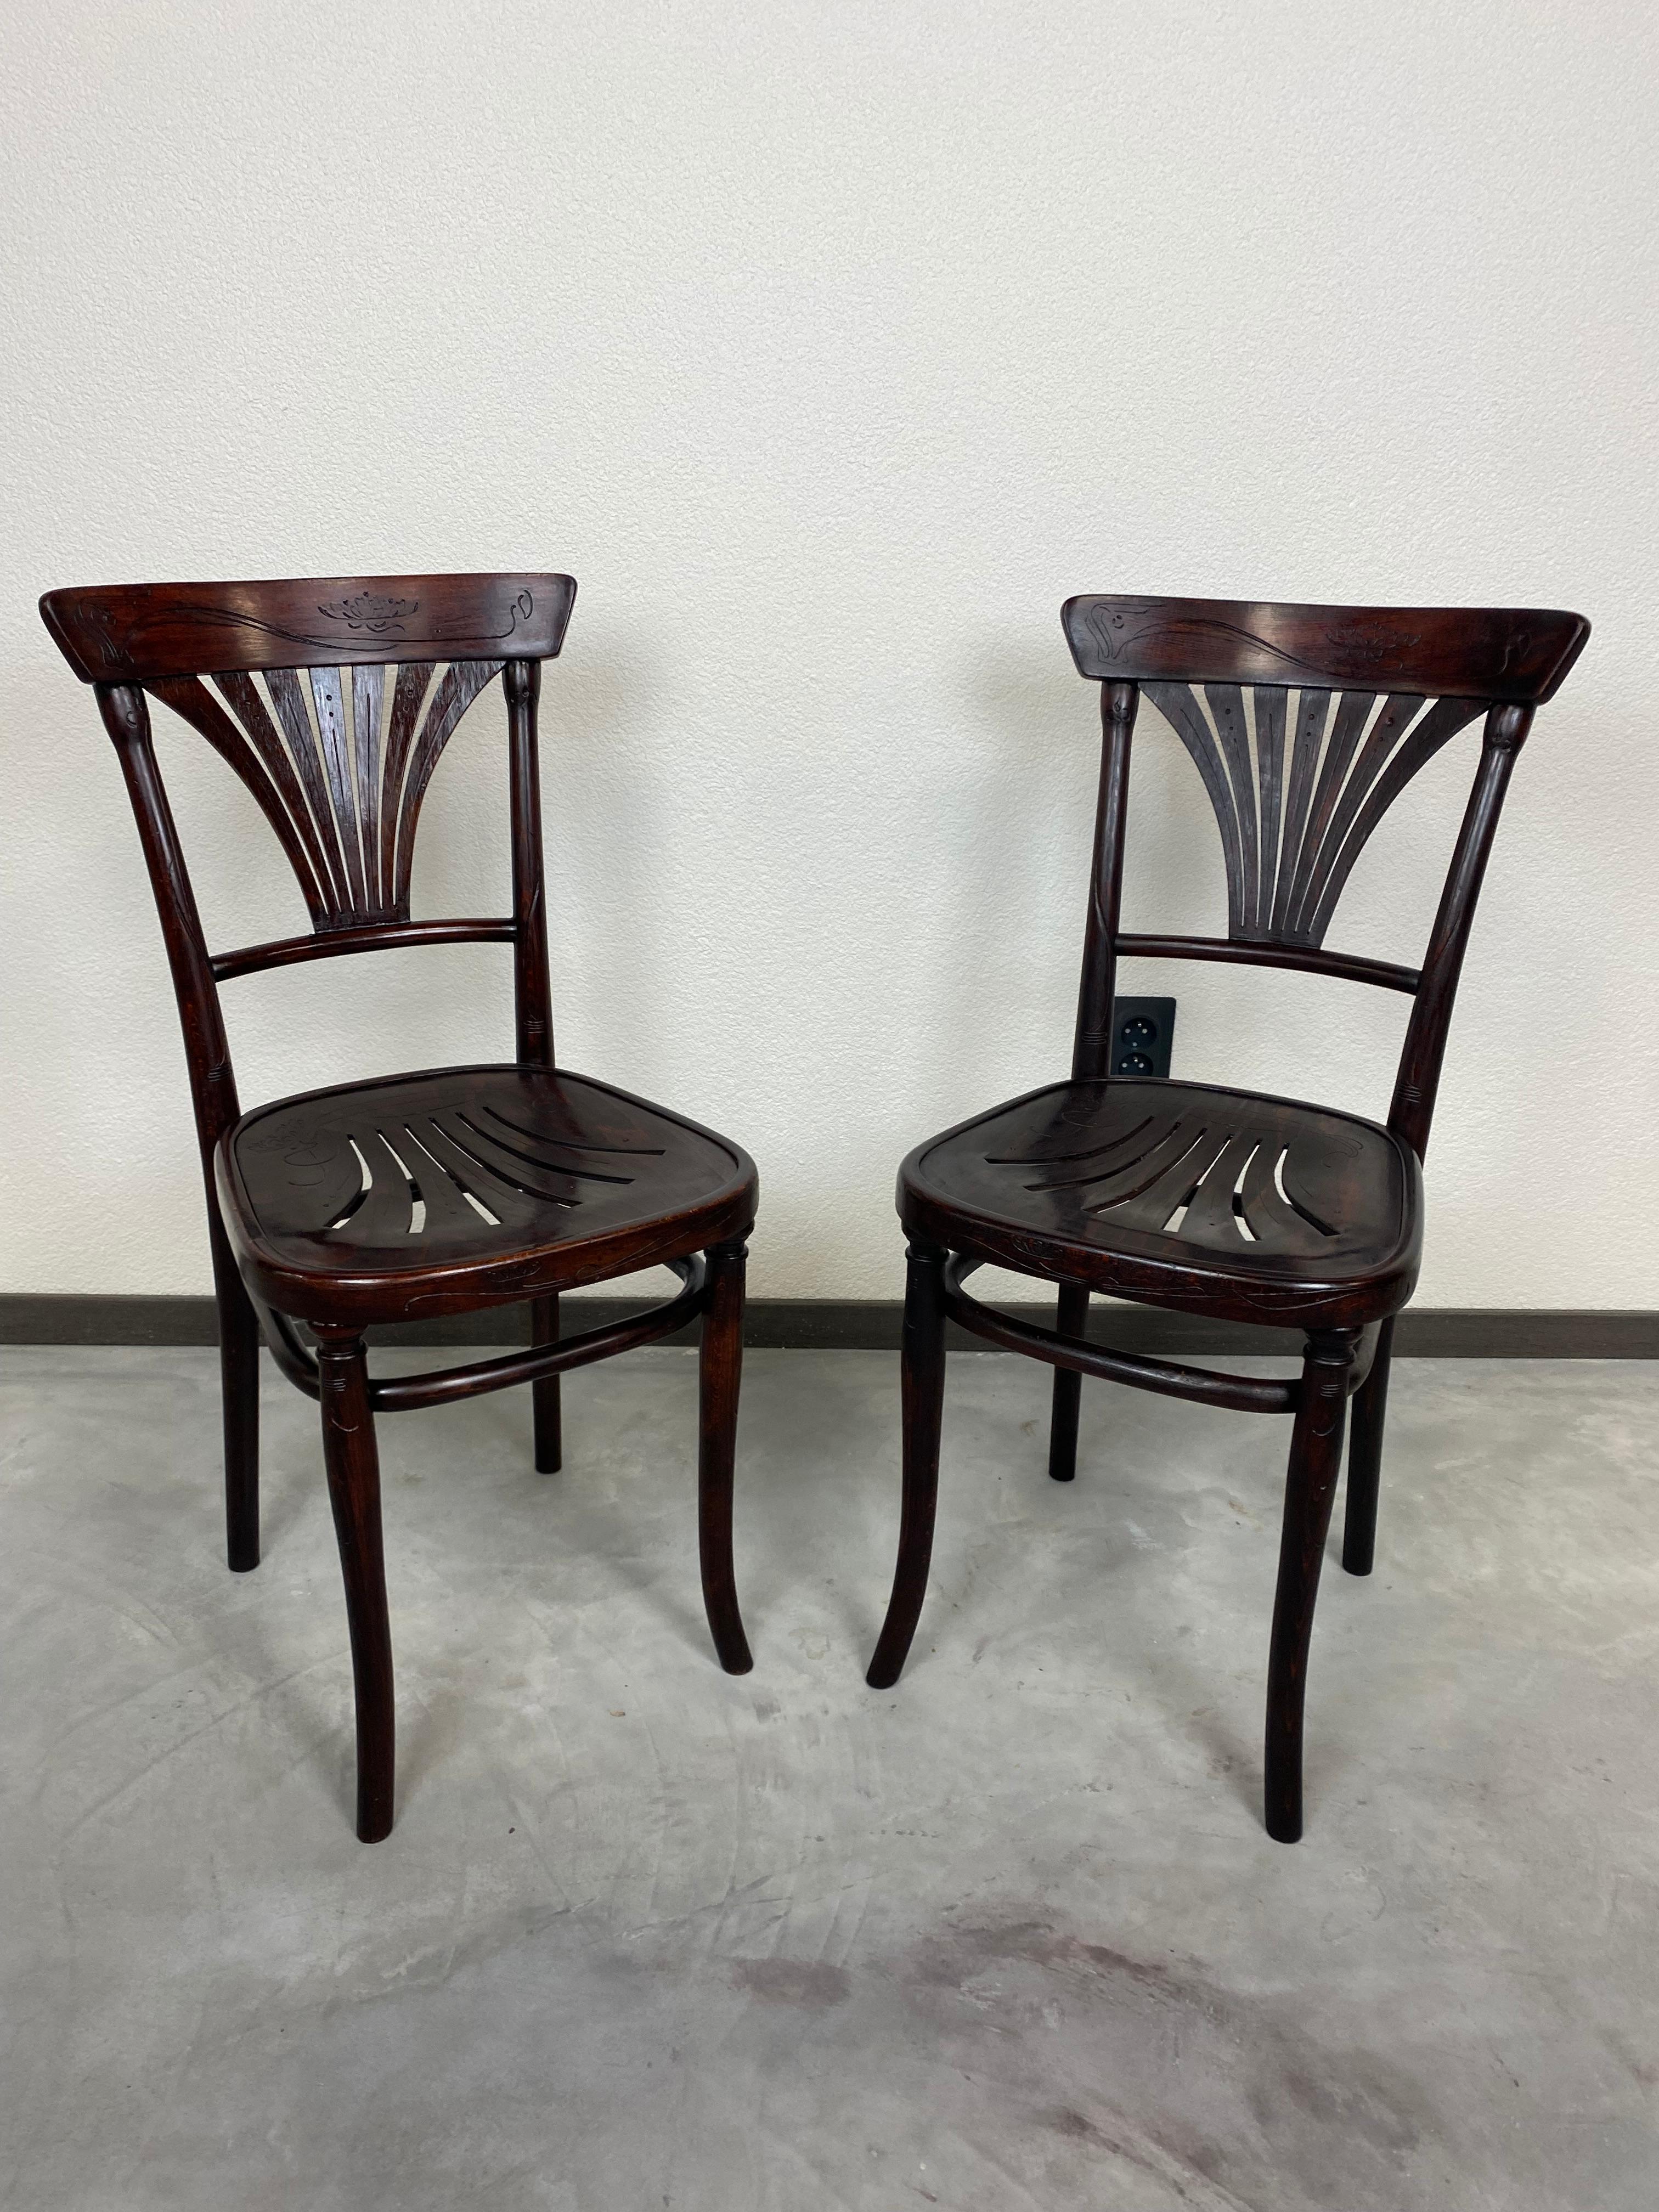 Secession Thonet dining chairs no.221 with carved flowers. Professionally stained and repolished.